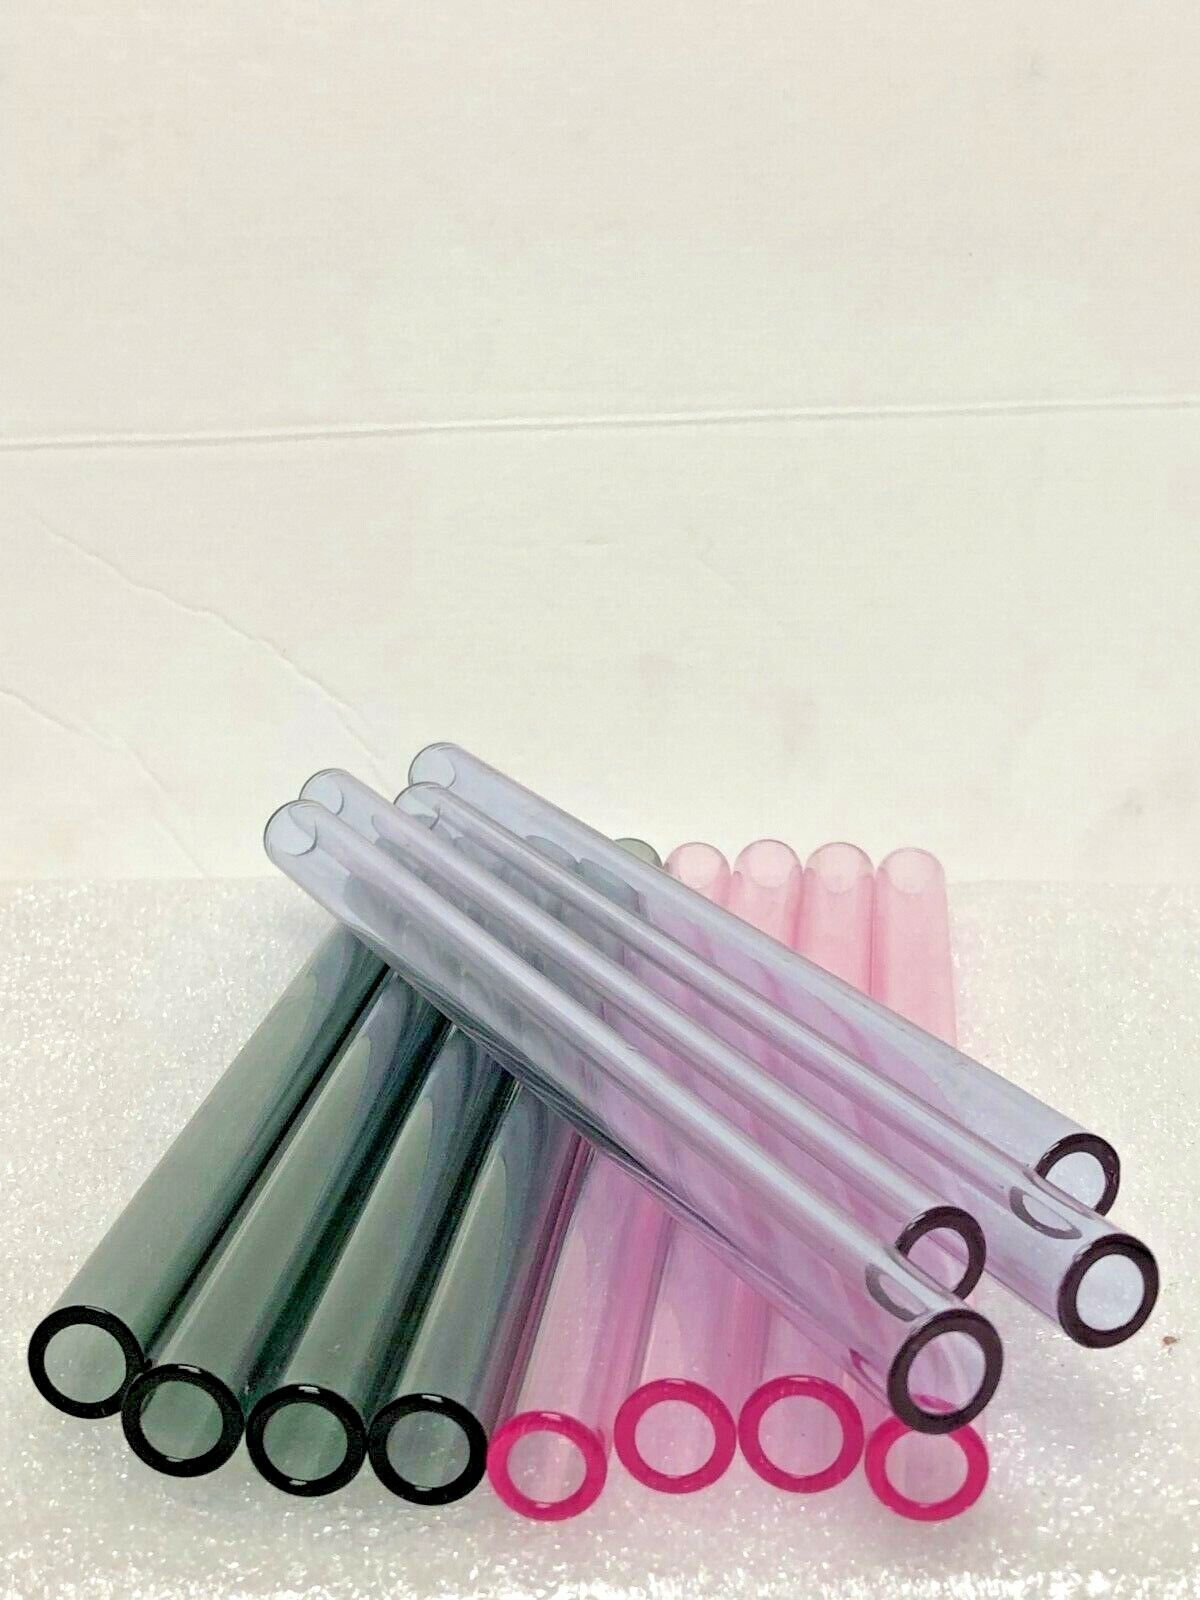 08 Pieces Glass tube Pyrex 12 mm X 2 mm X 12" Long   Blowing tube  ID=8mm  Color Pyrex Does Not Apply - фотография #6